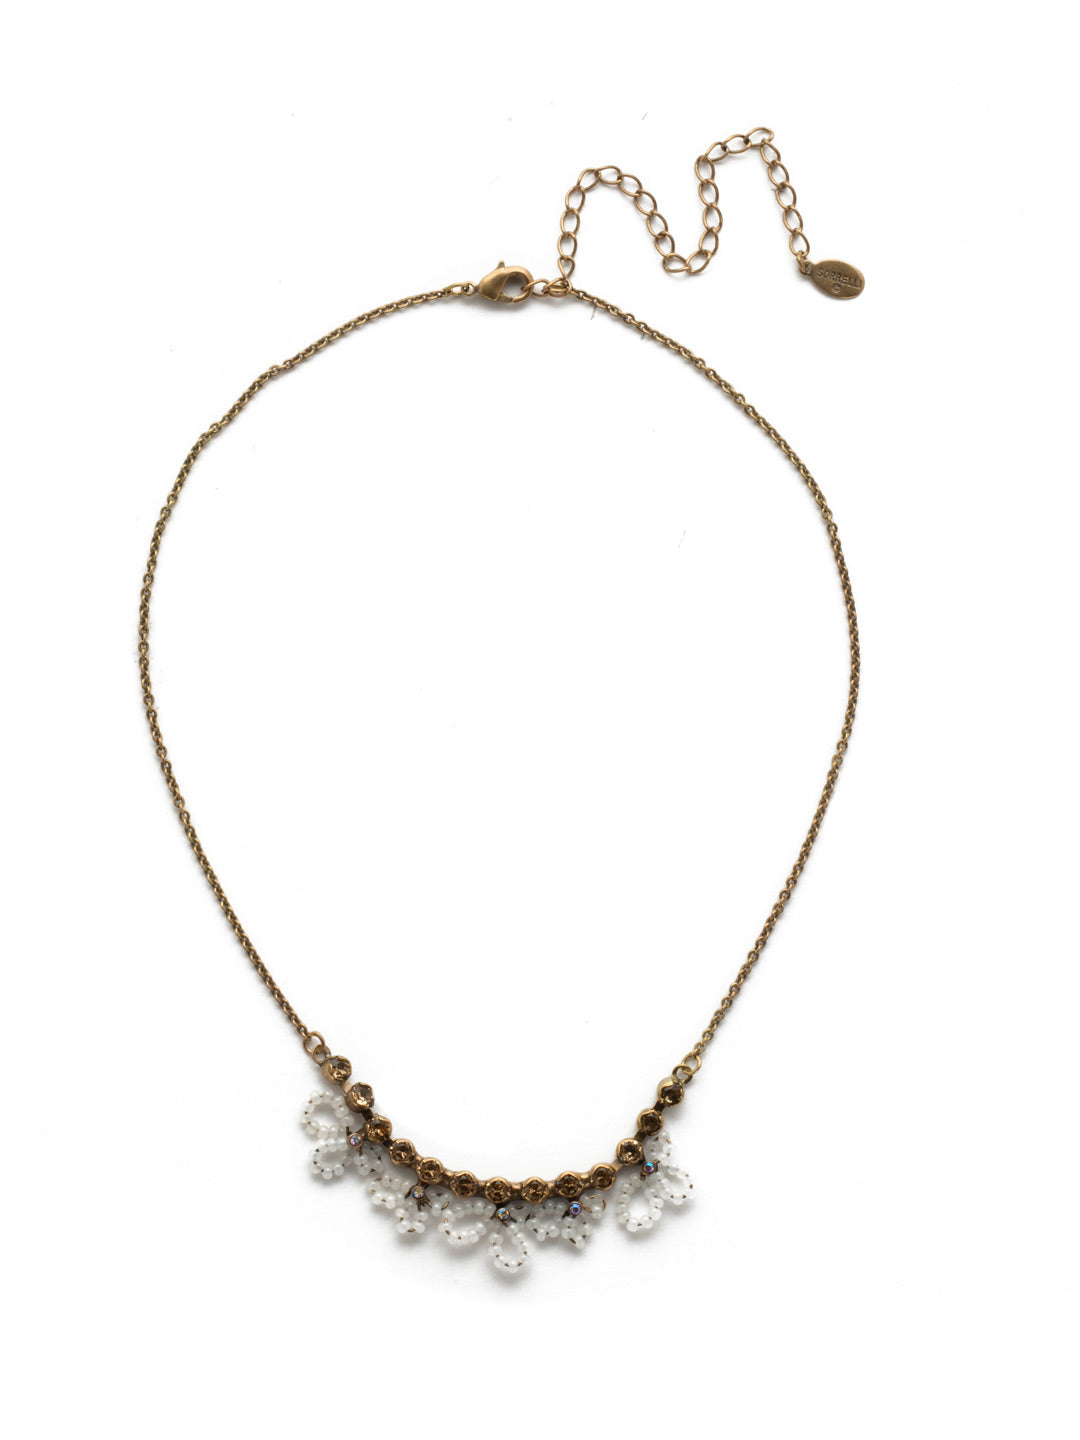 Glowlight Tennis Necklace - NEH14AGROB - A simple adjustable strand accented with crystals is elevated with handcrafted beadwork in this need-it-now necklace. From Sorrelli's Rocky Beach collection in our Antique Gold-tone finish.